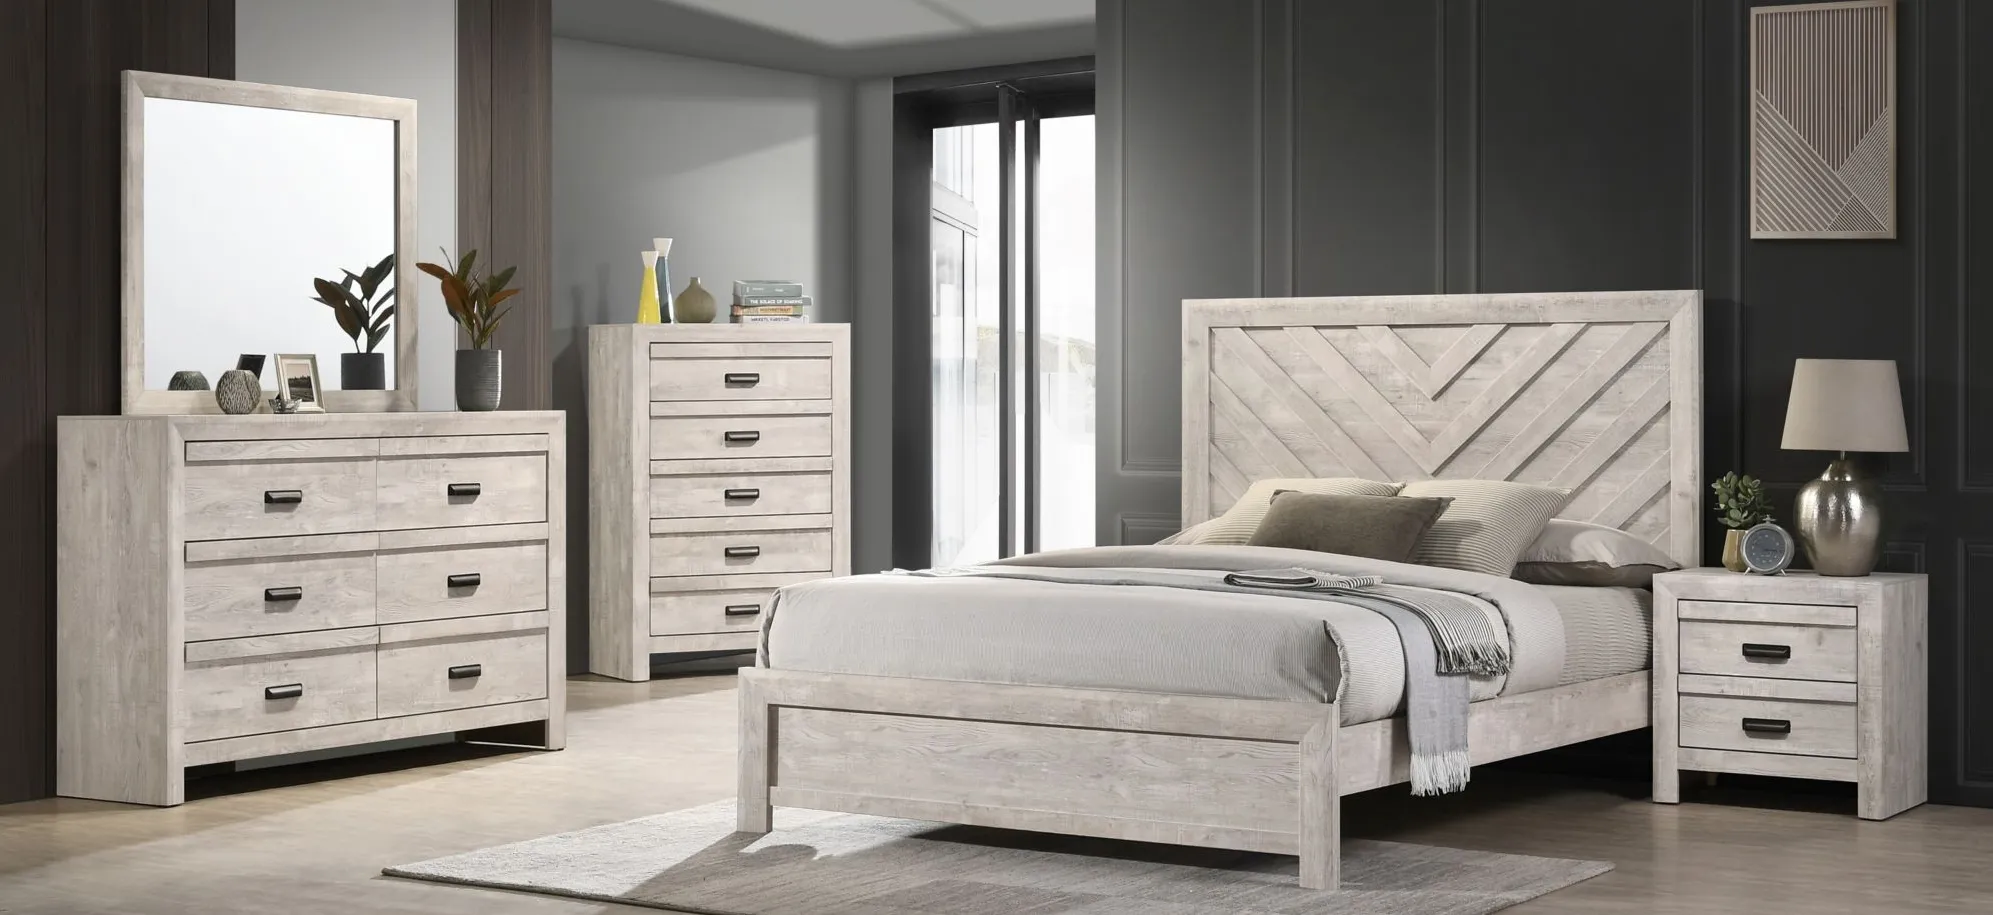 Valor 5-Pc Queen Bedroom Set in White by Crown Mark